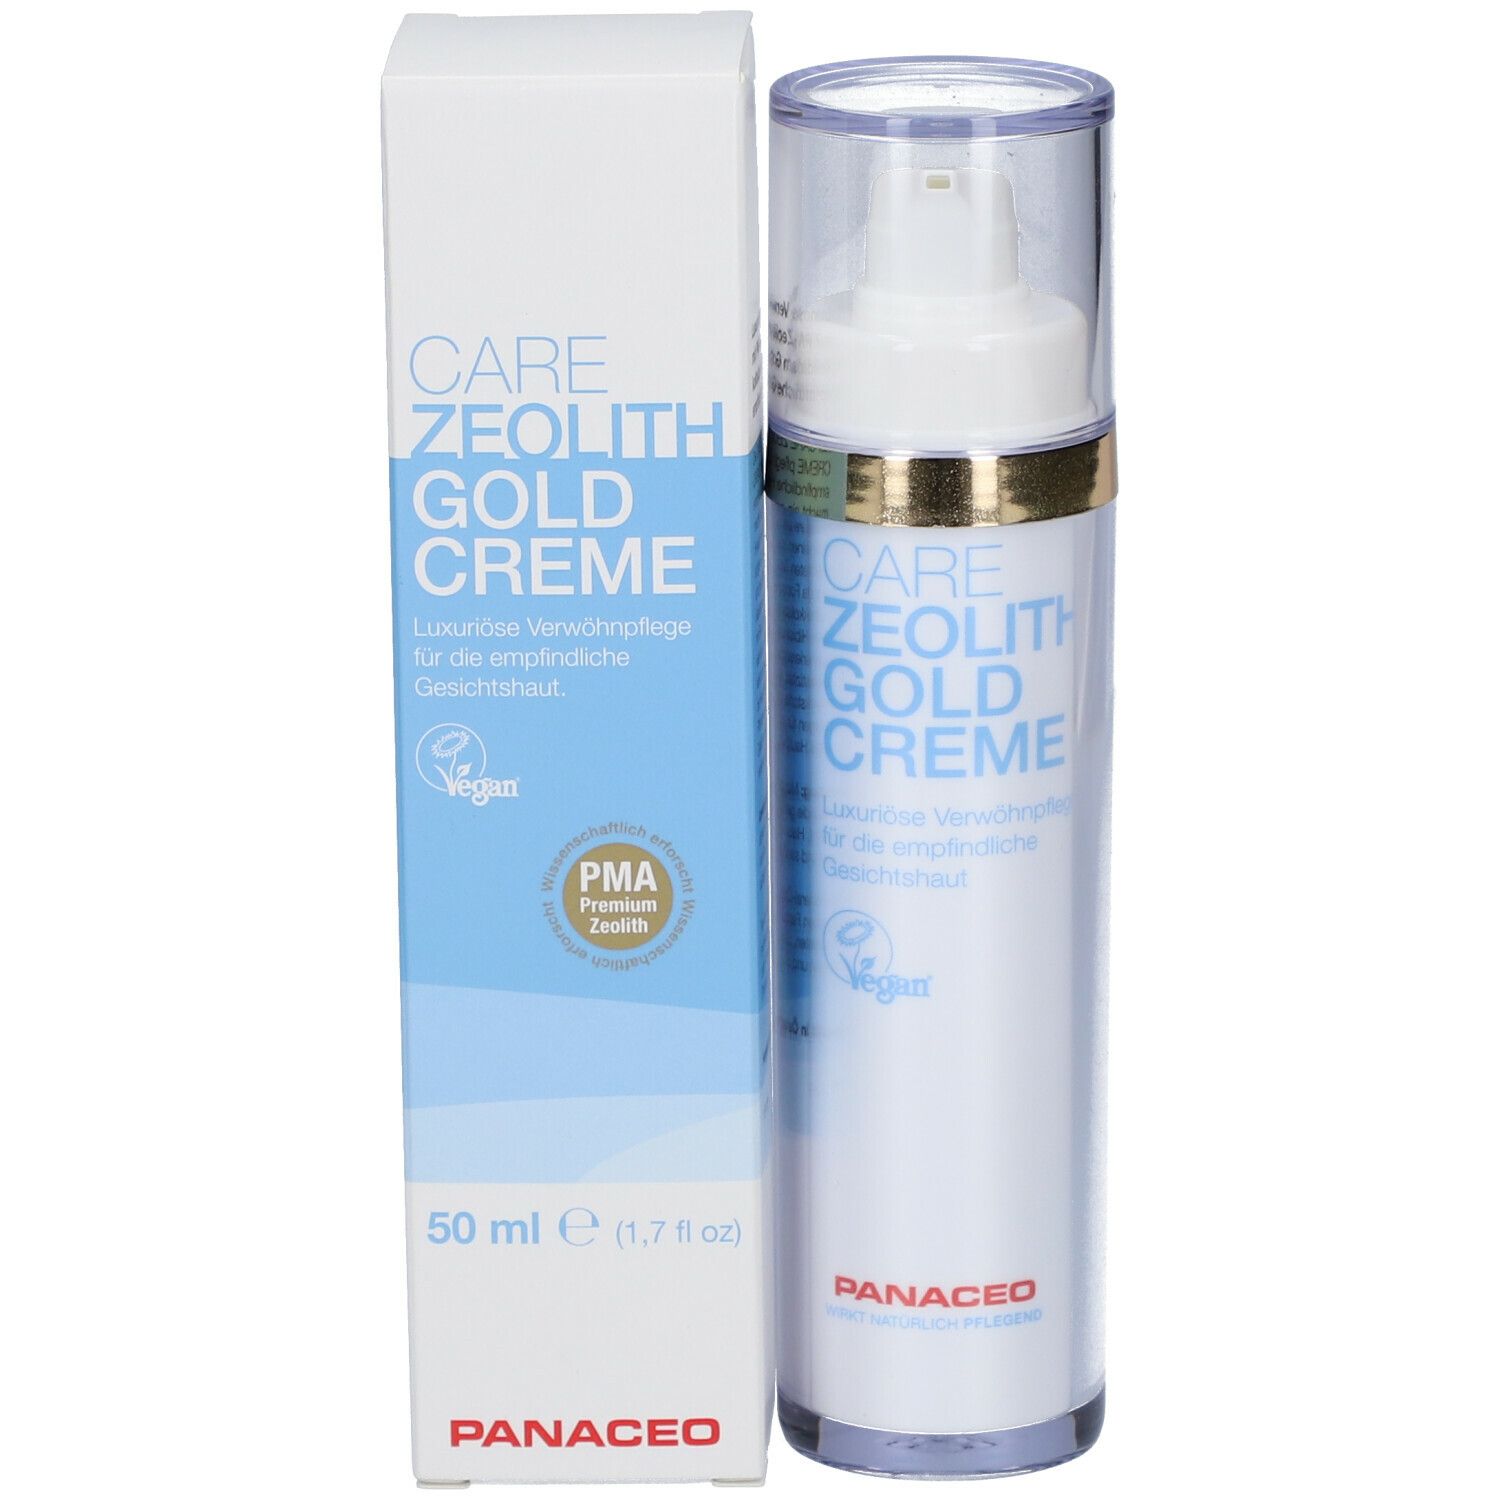 PANACEO CARE ZEOLITH GOLDCREME